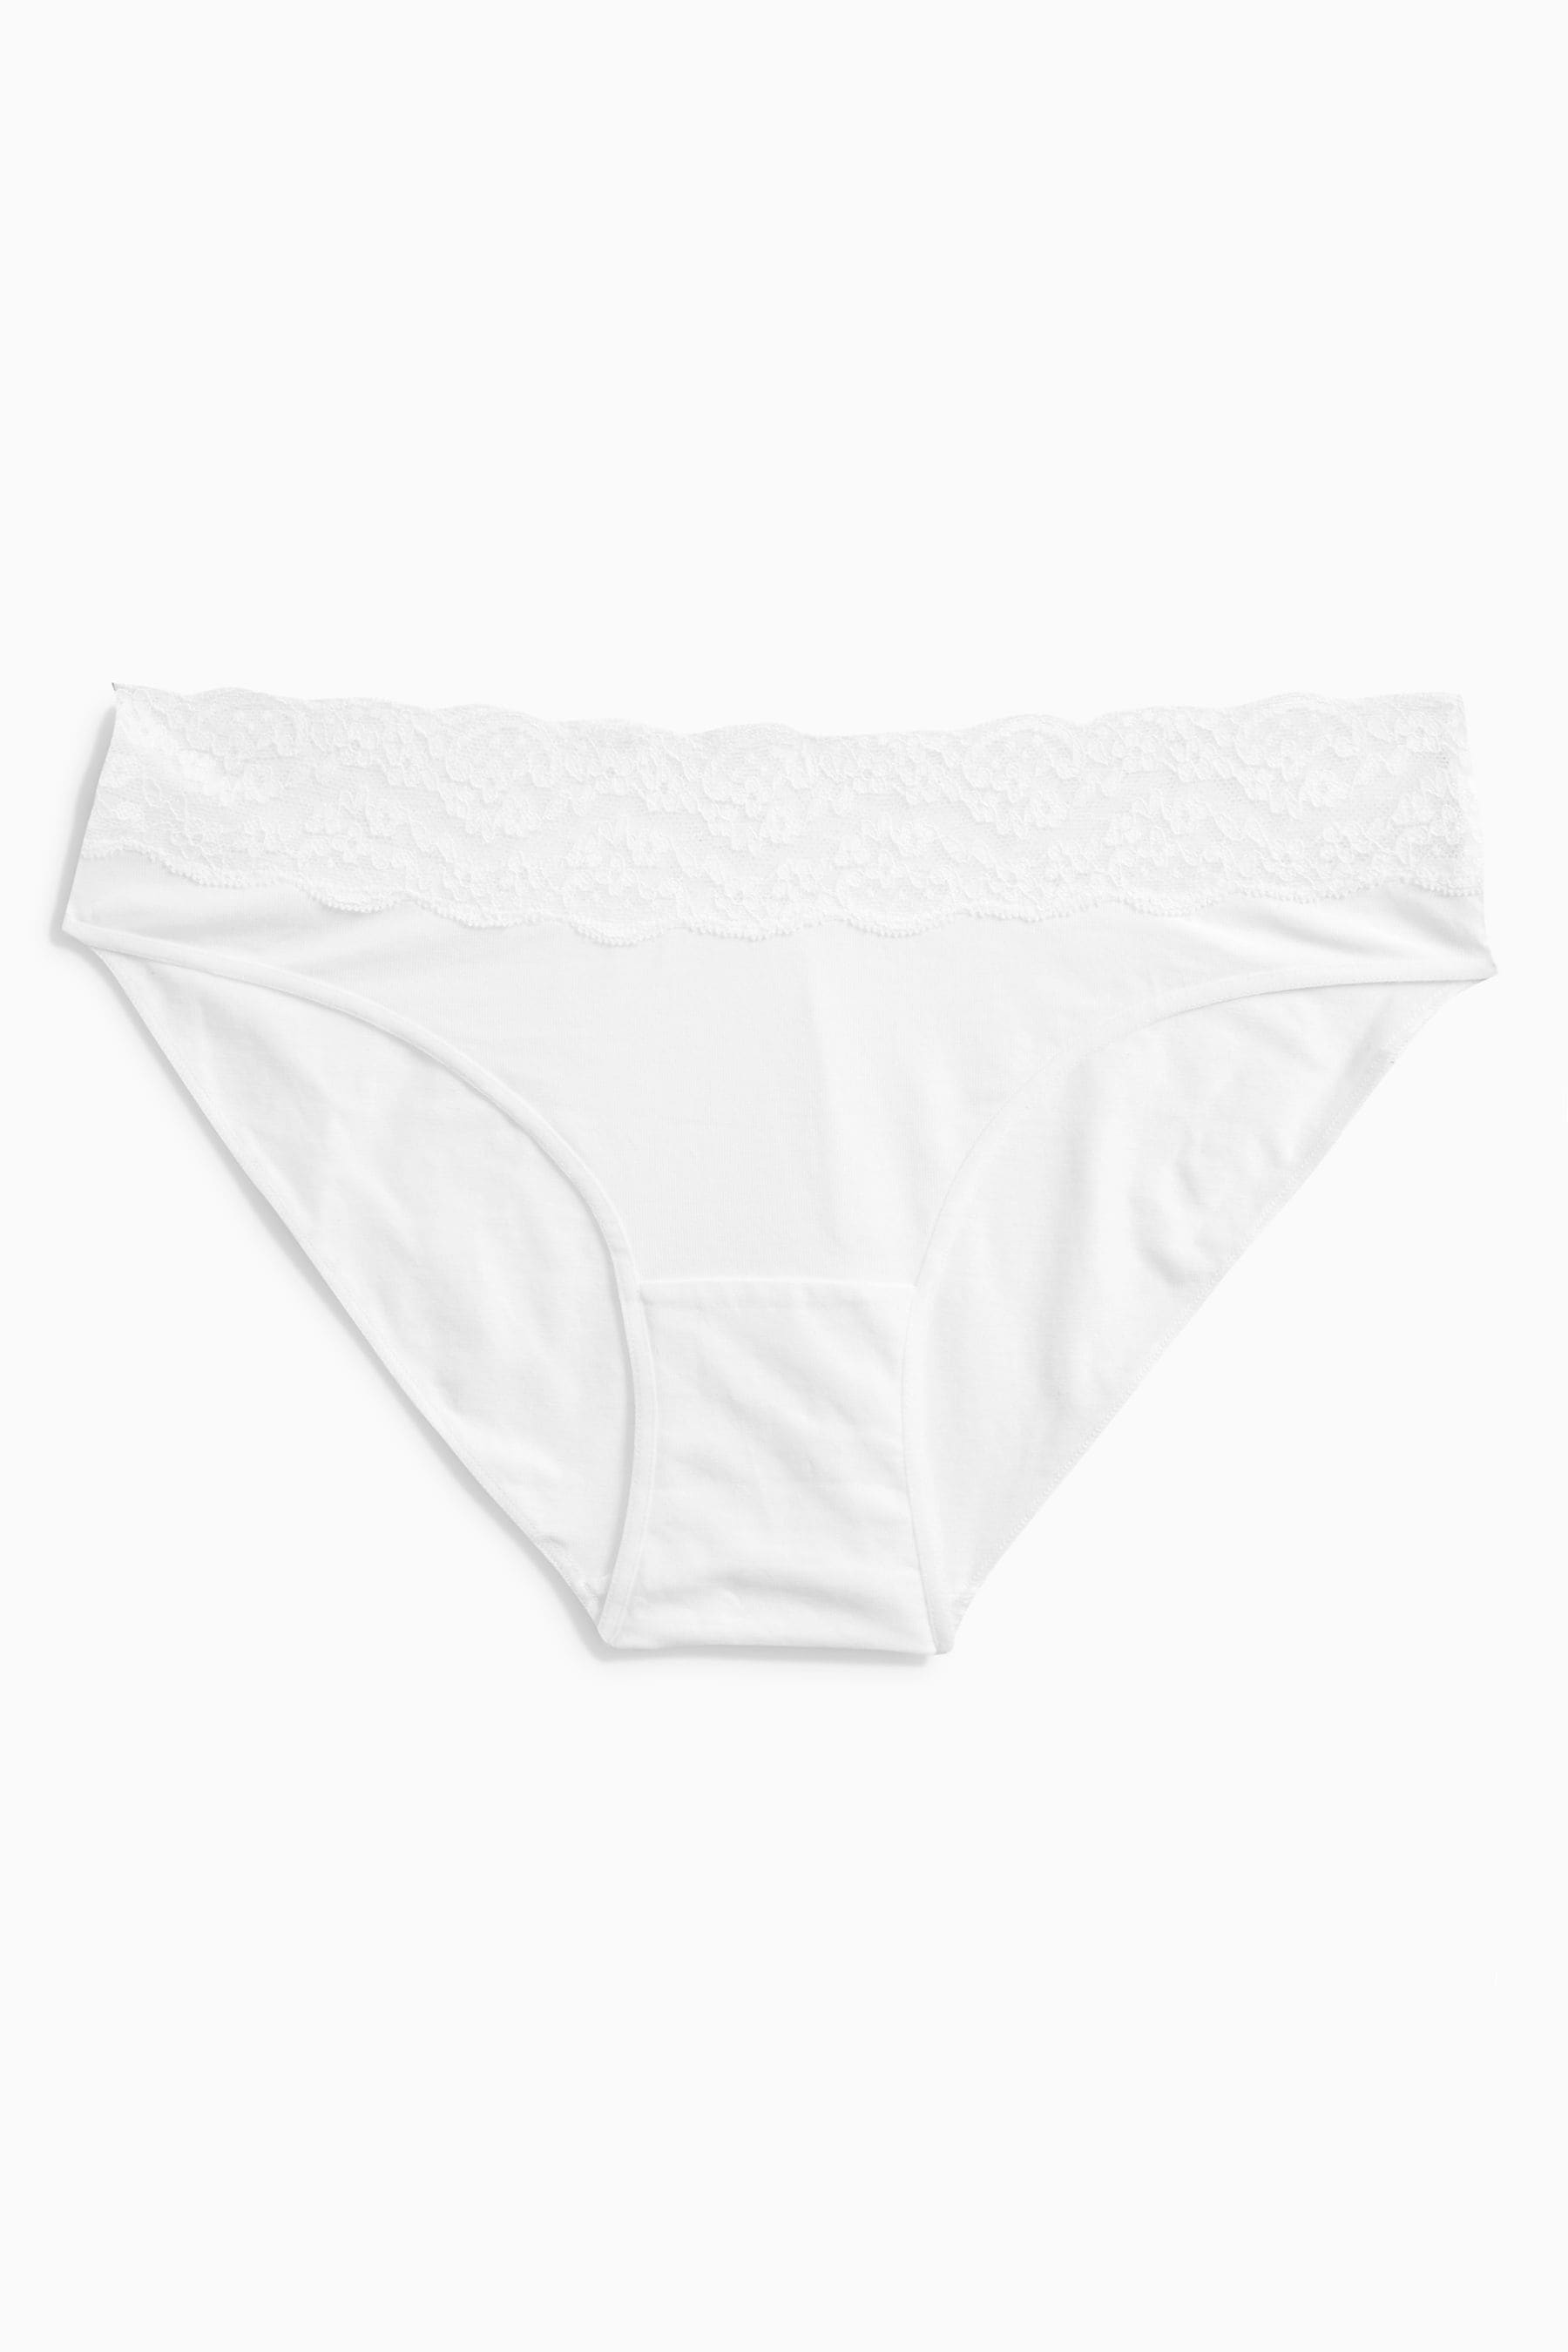 Buy Monochrome High Leg Lace Trim Cotton Blend Knickers 4 Pack from the ...